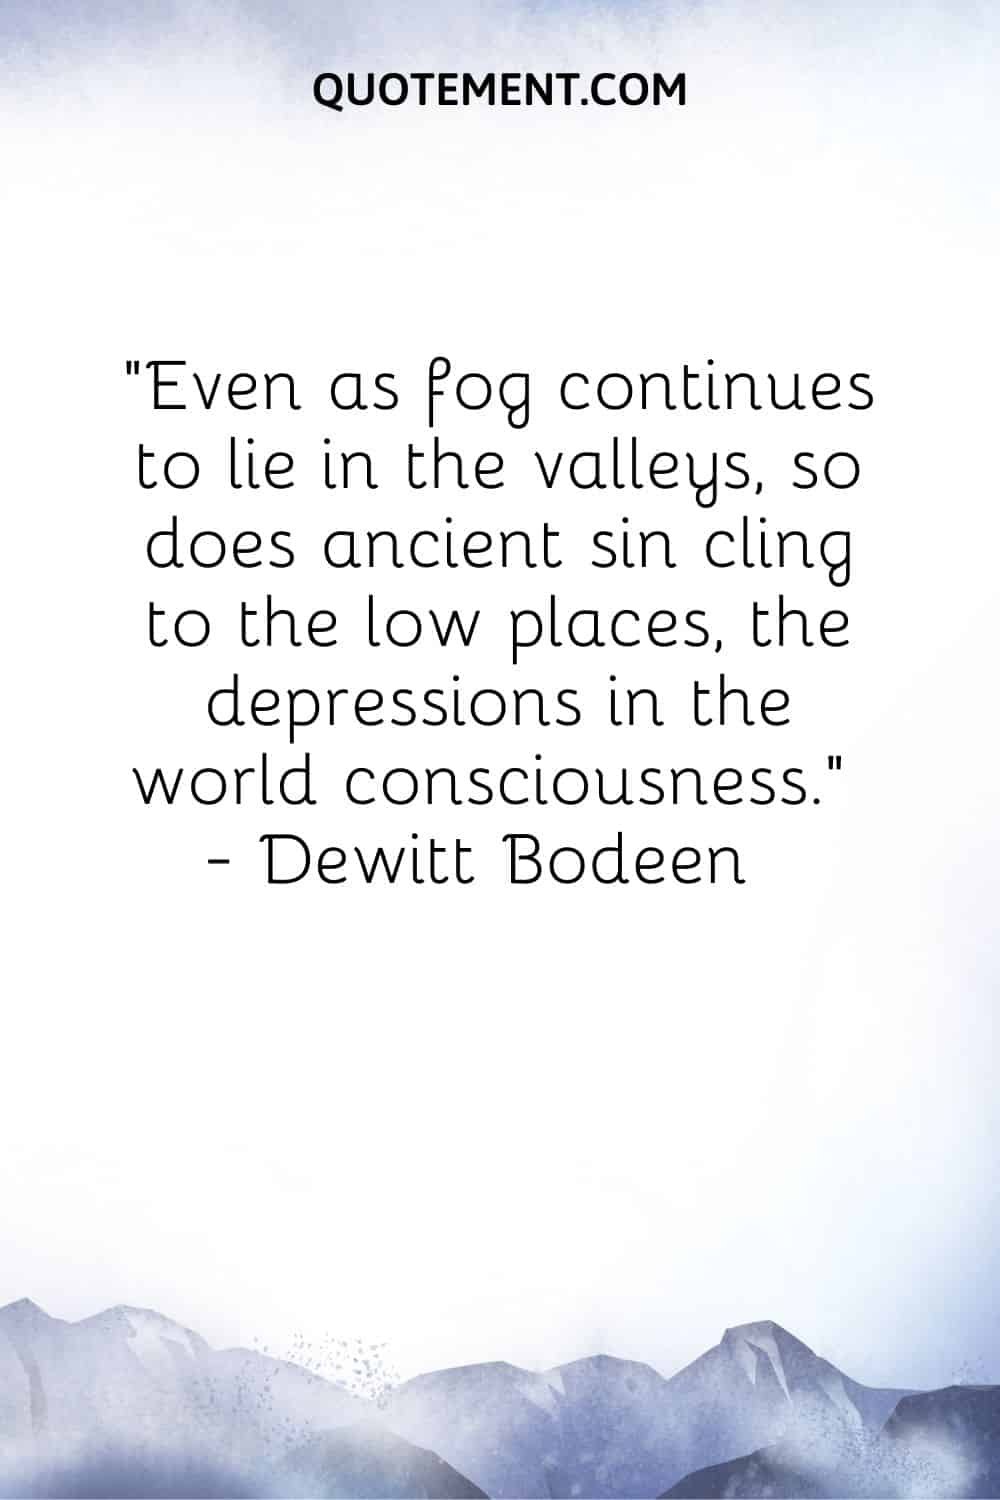 Even as fog continues to lie in the valleys, so does ancient sin cling to the low places